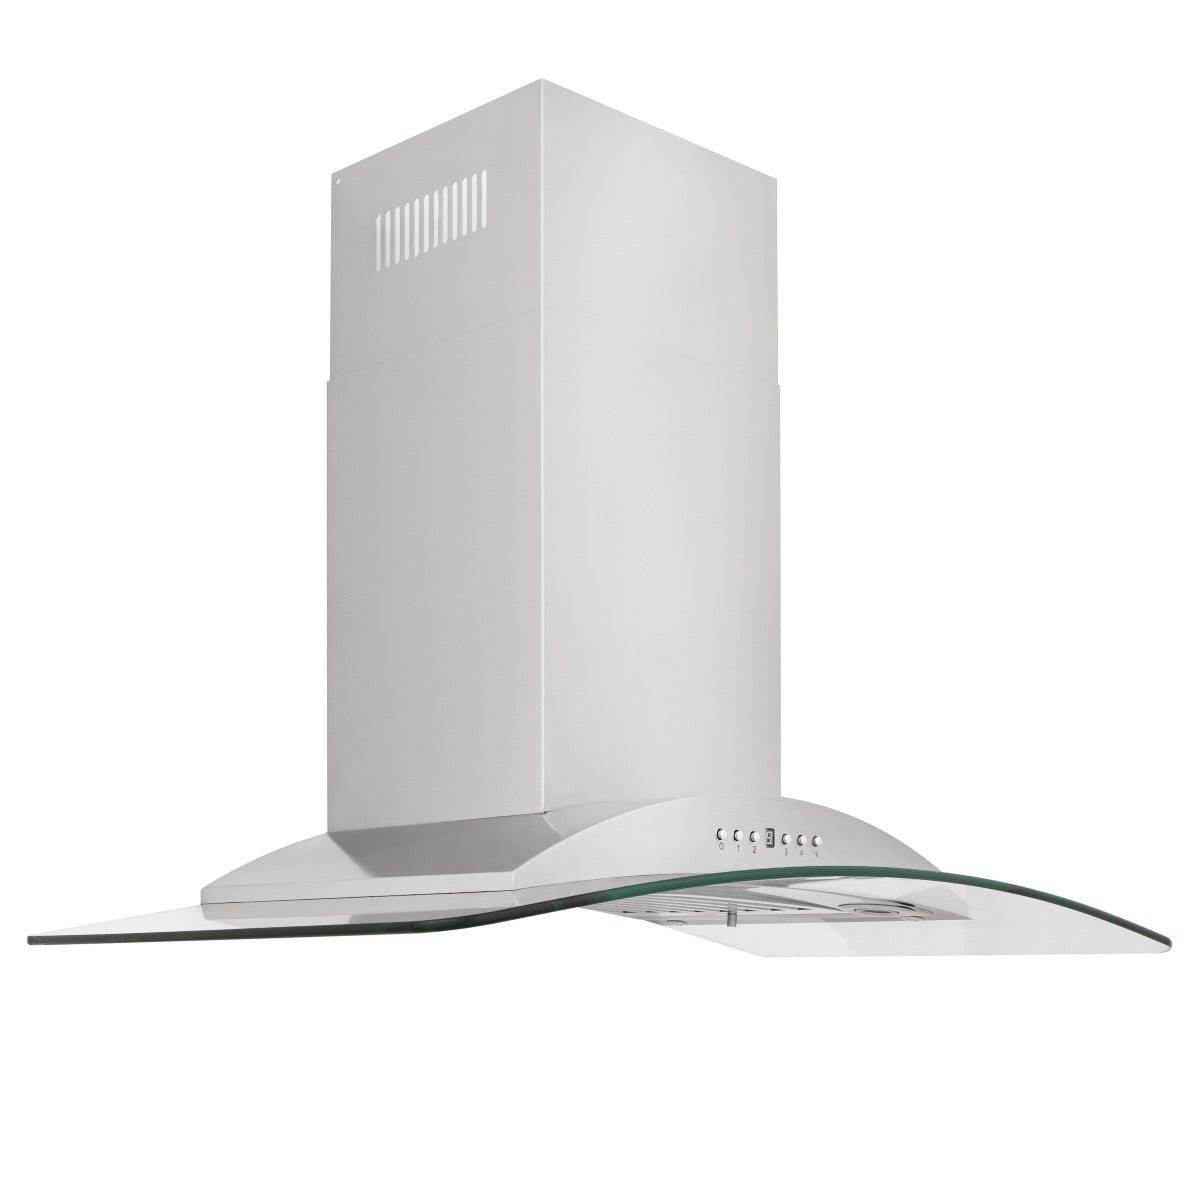 ZLINE 36 in. Convertible Vent Wall Mount Range Hood in Stainless Steel & Glass, KN-36